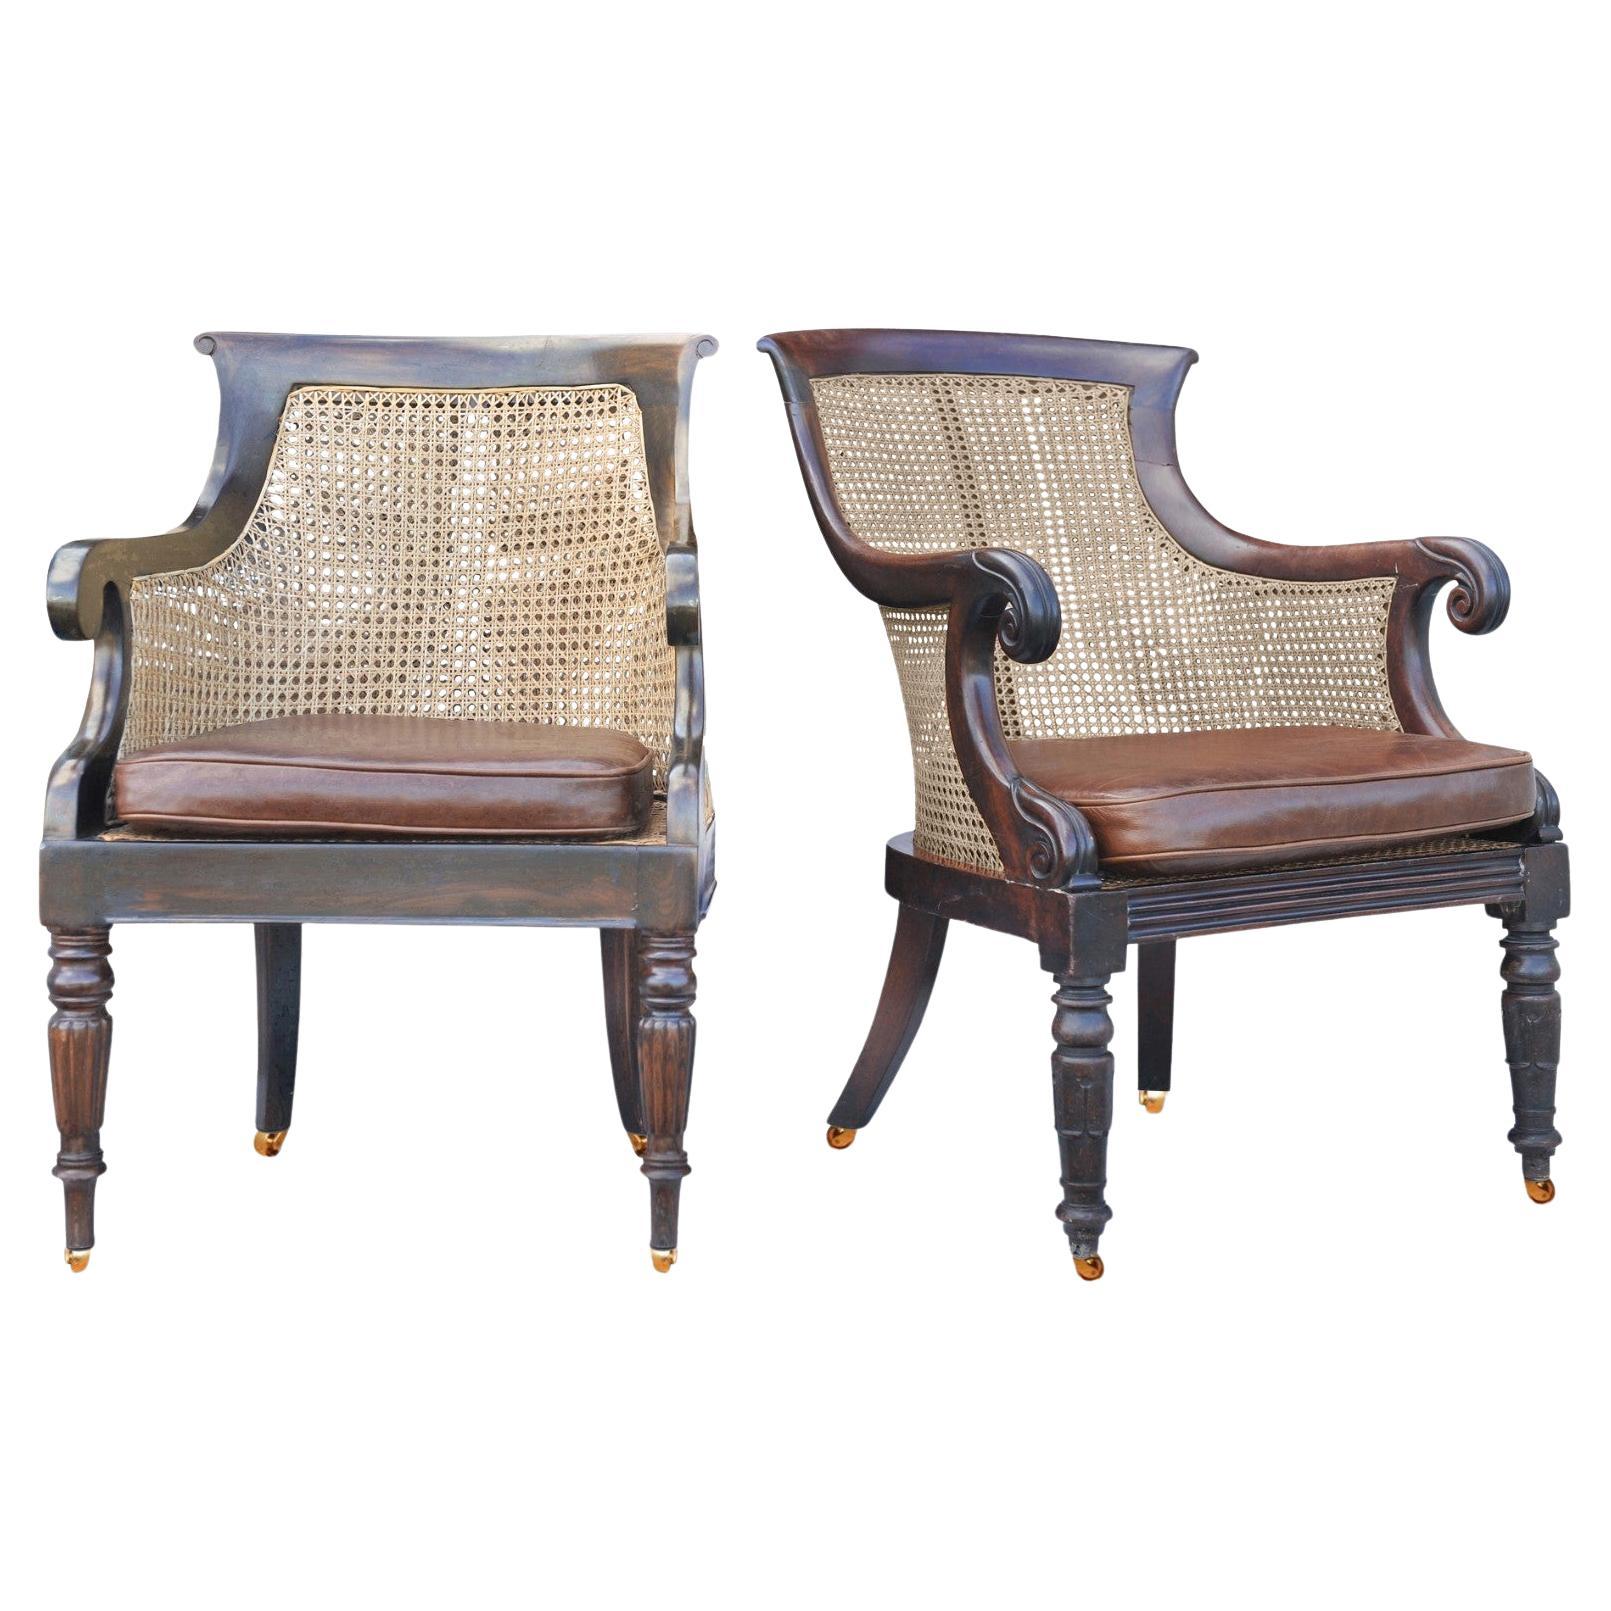 A Pair of Antique William IV Hardwood Cane Bergere & Leather Library Armchairs 